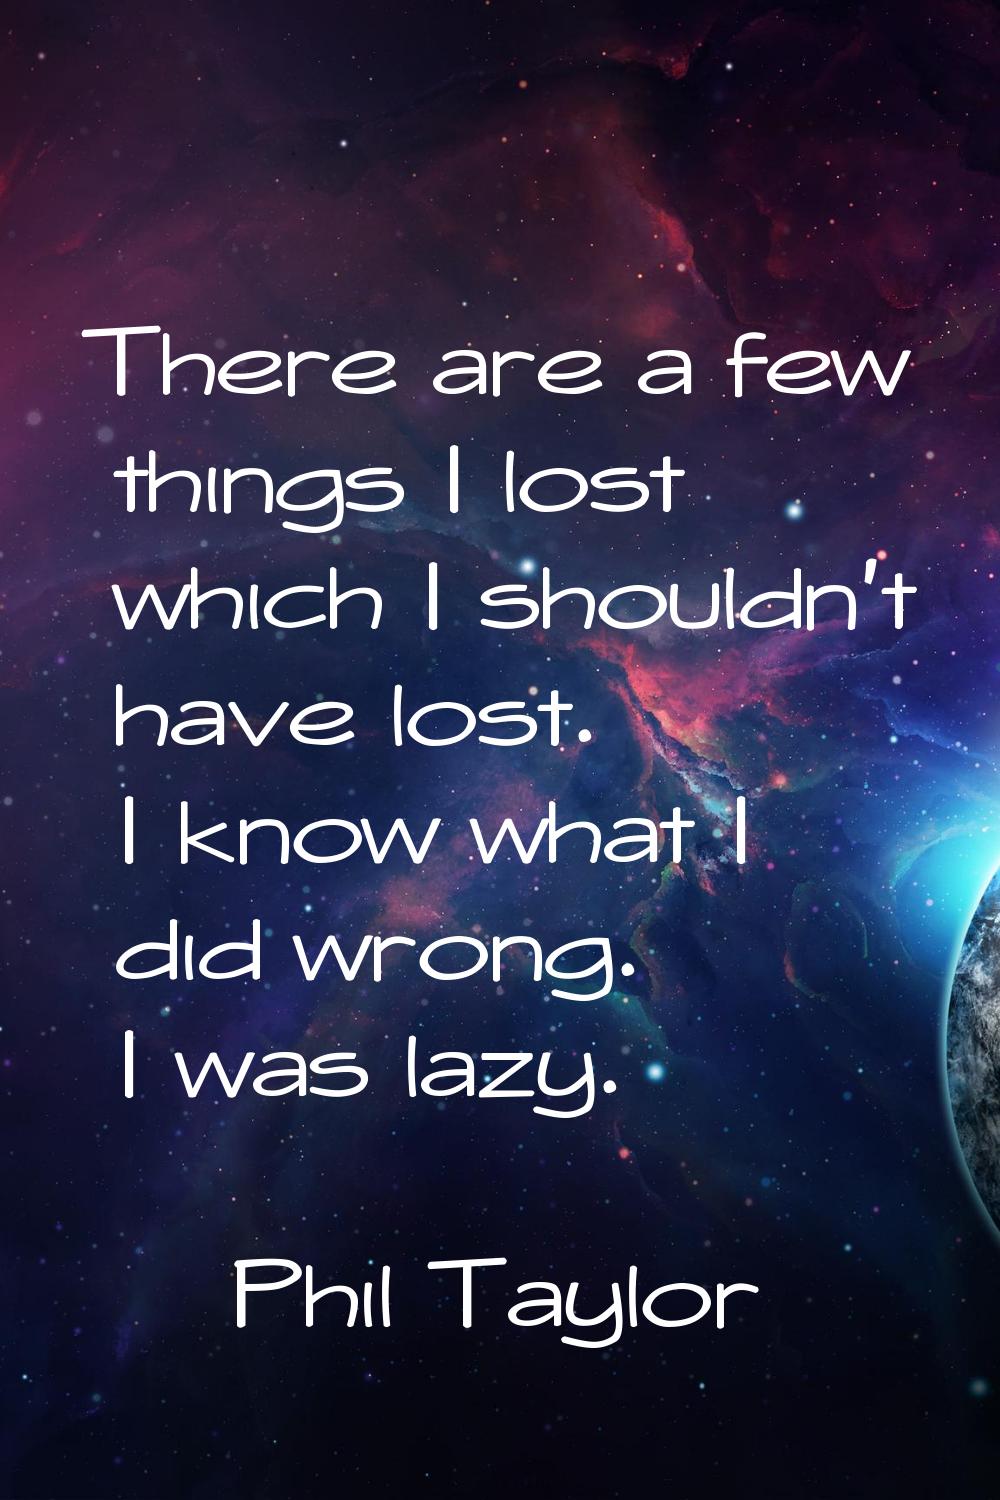 There are a few things I lost which I shouldn't have lost. I know what I did wrong. I was lazy.